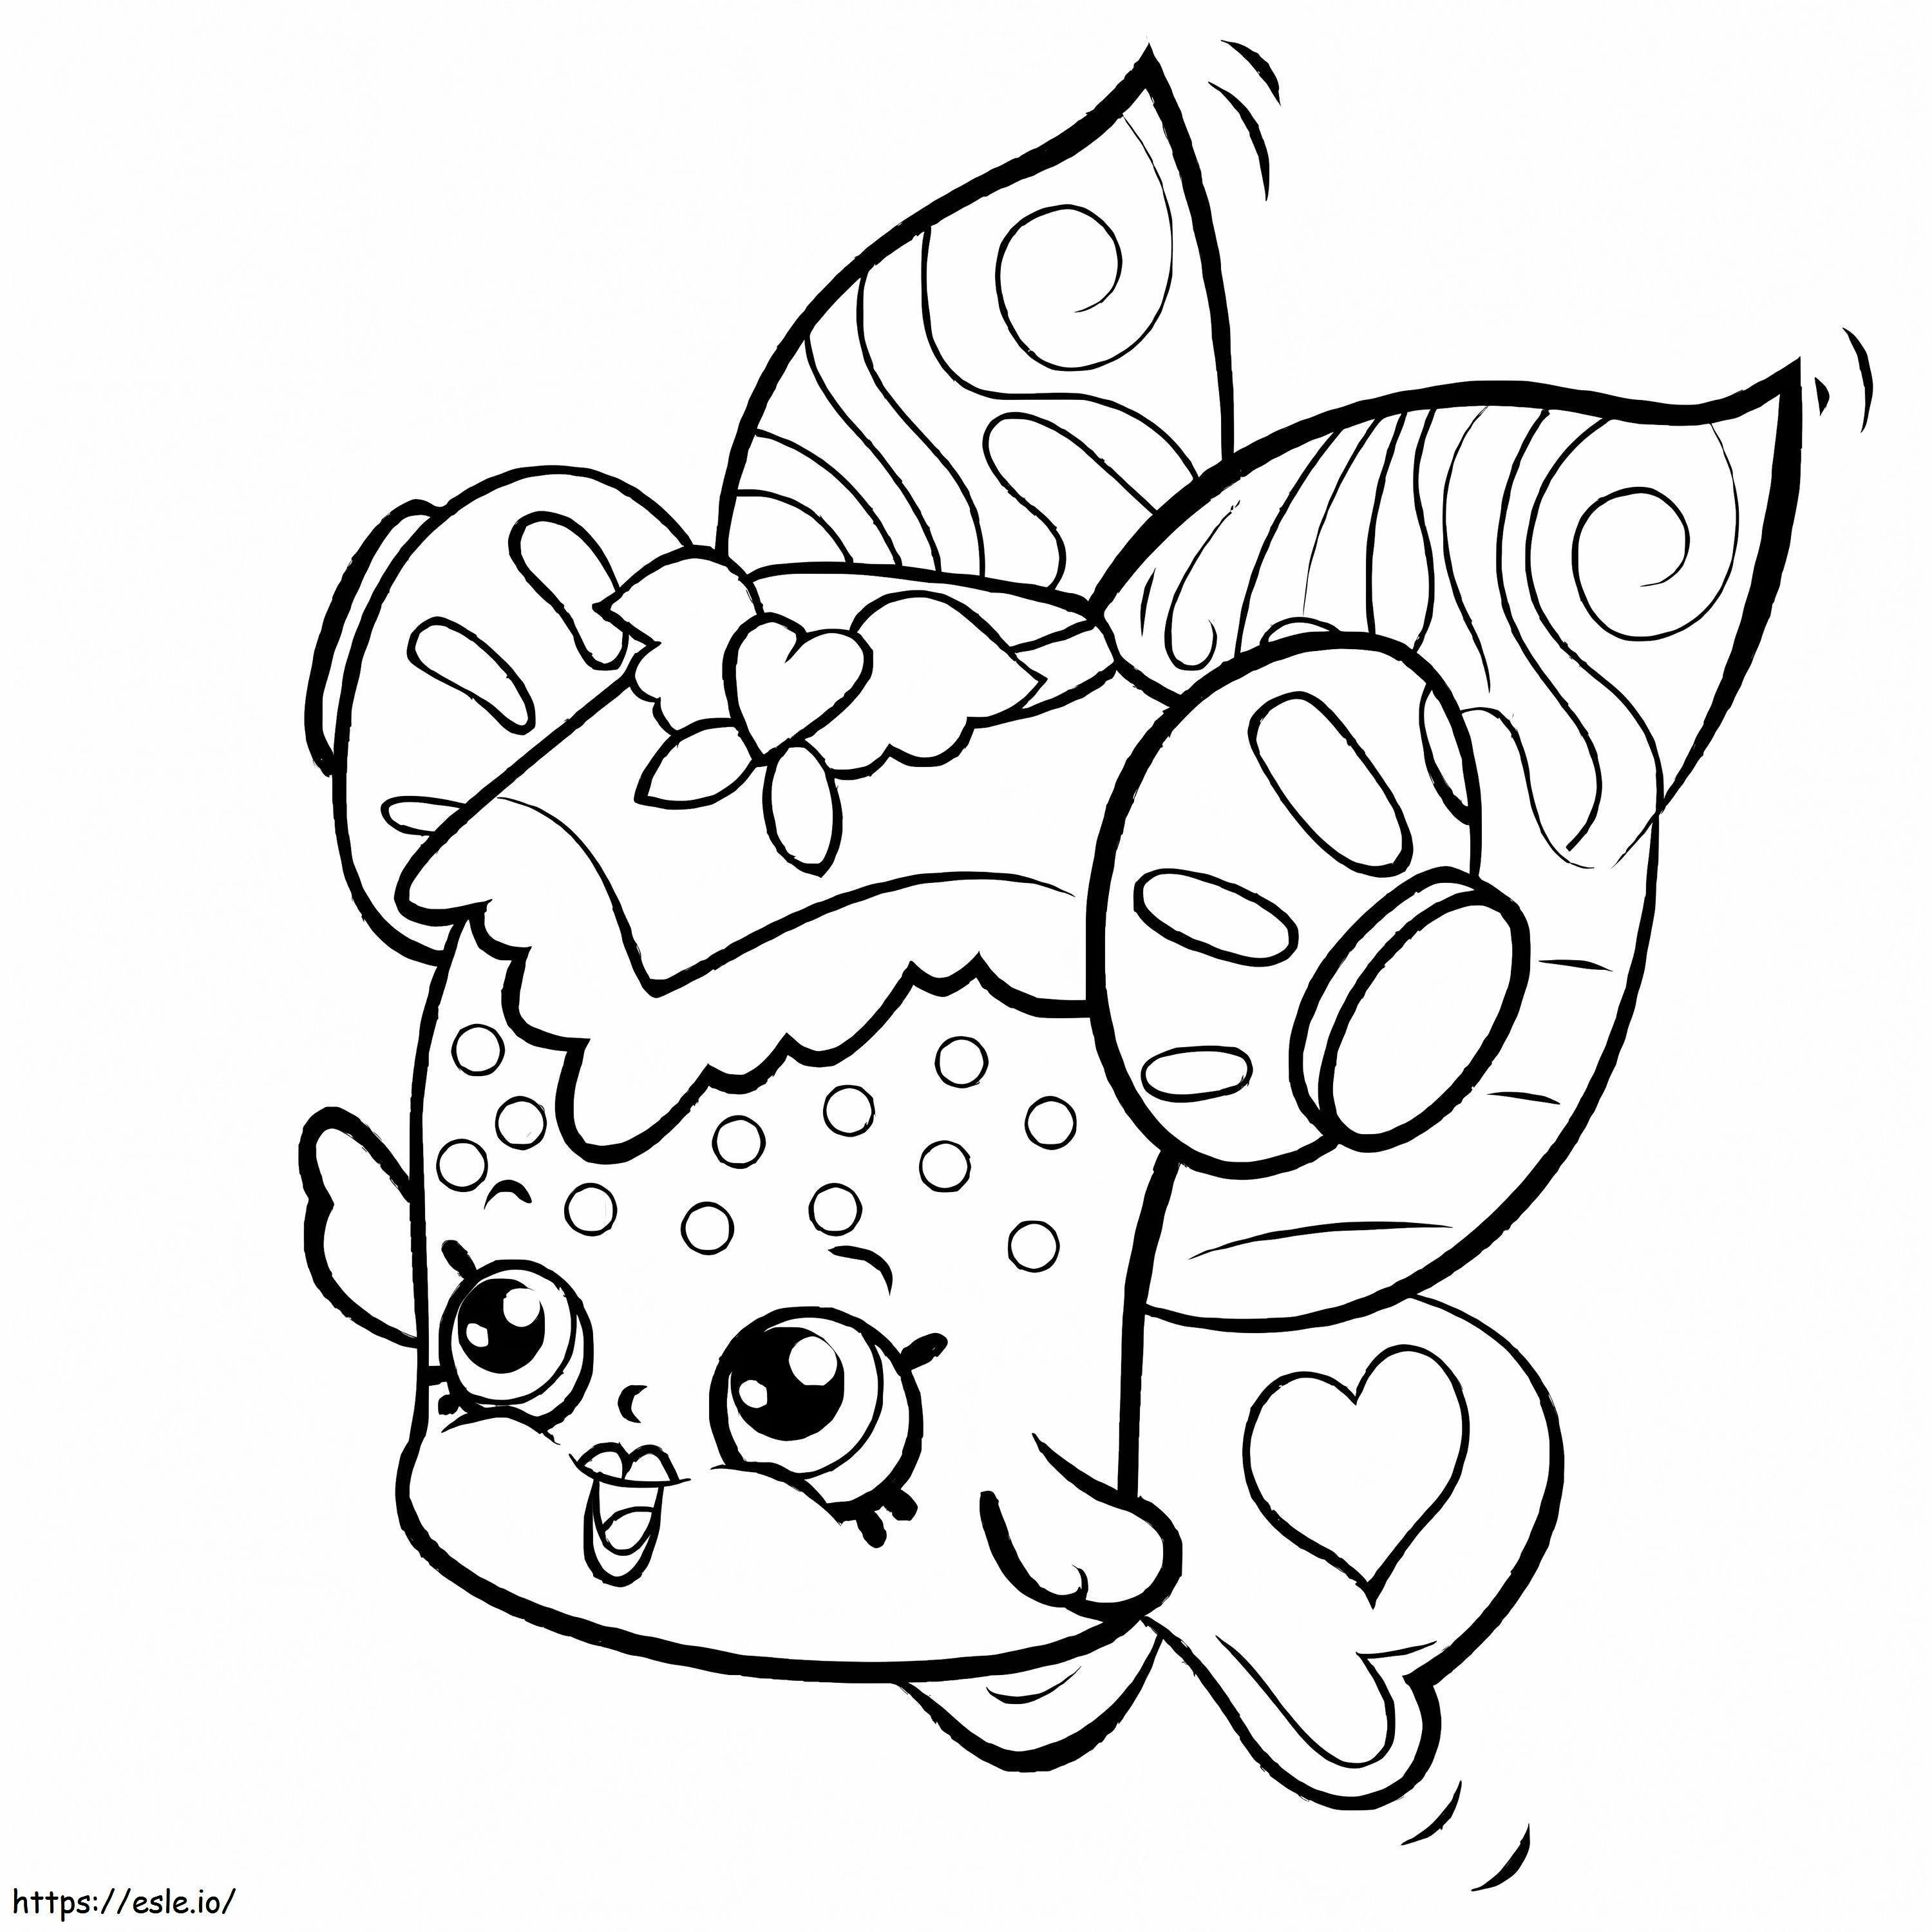 Costume Shop coloring page